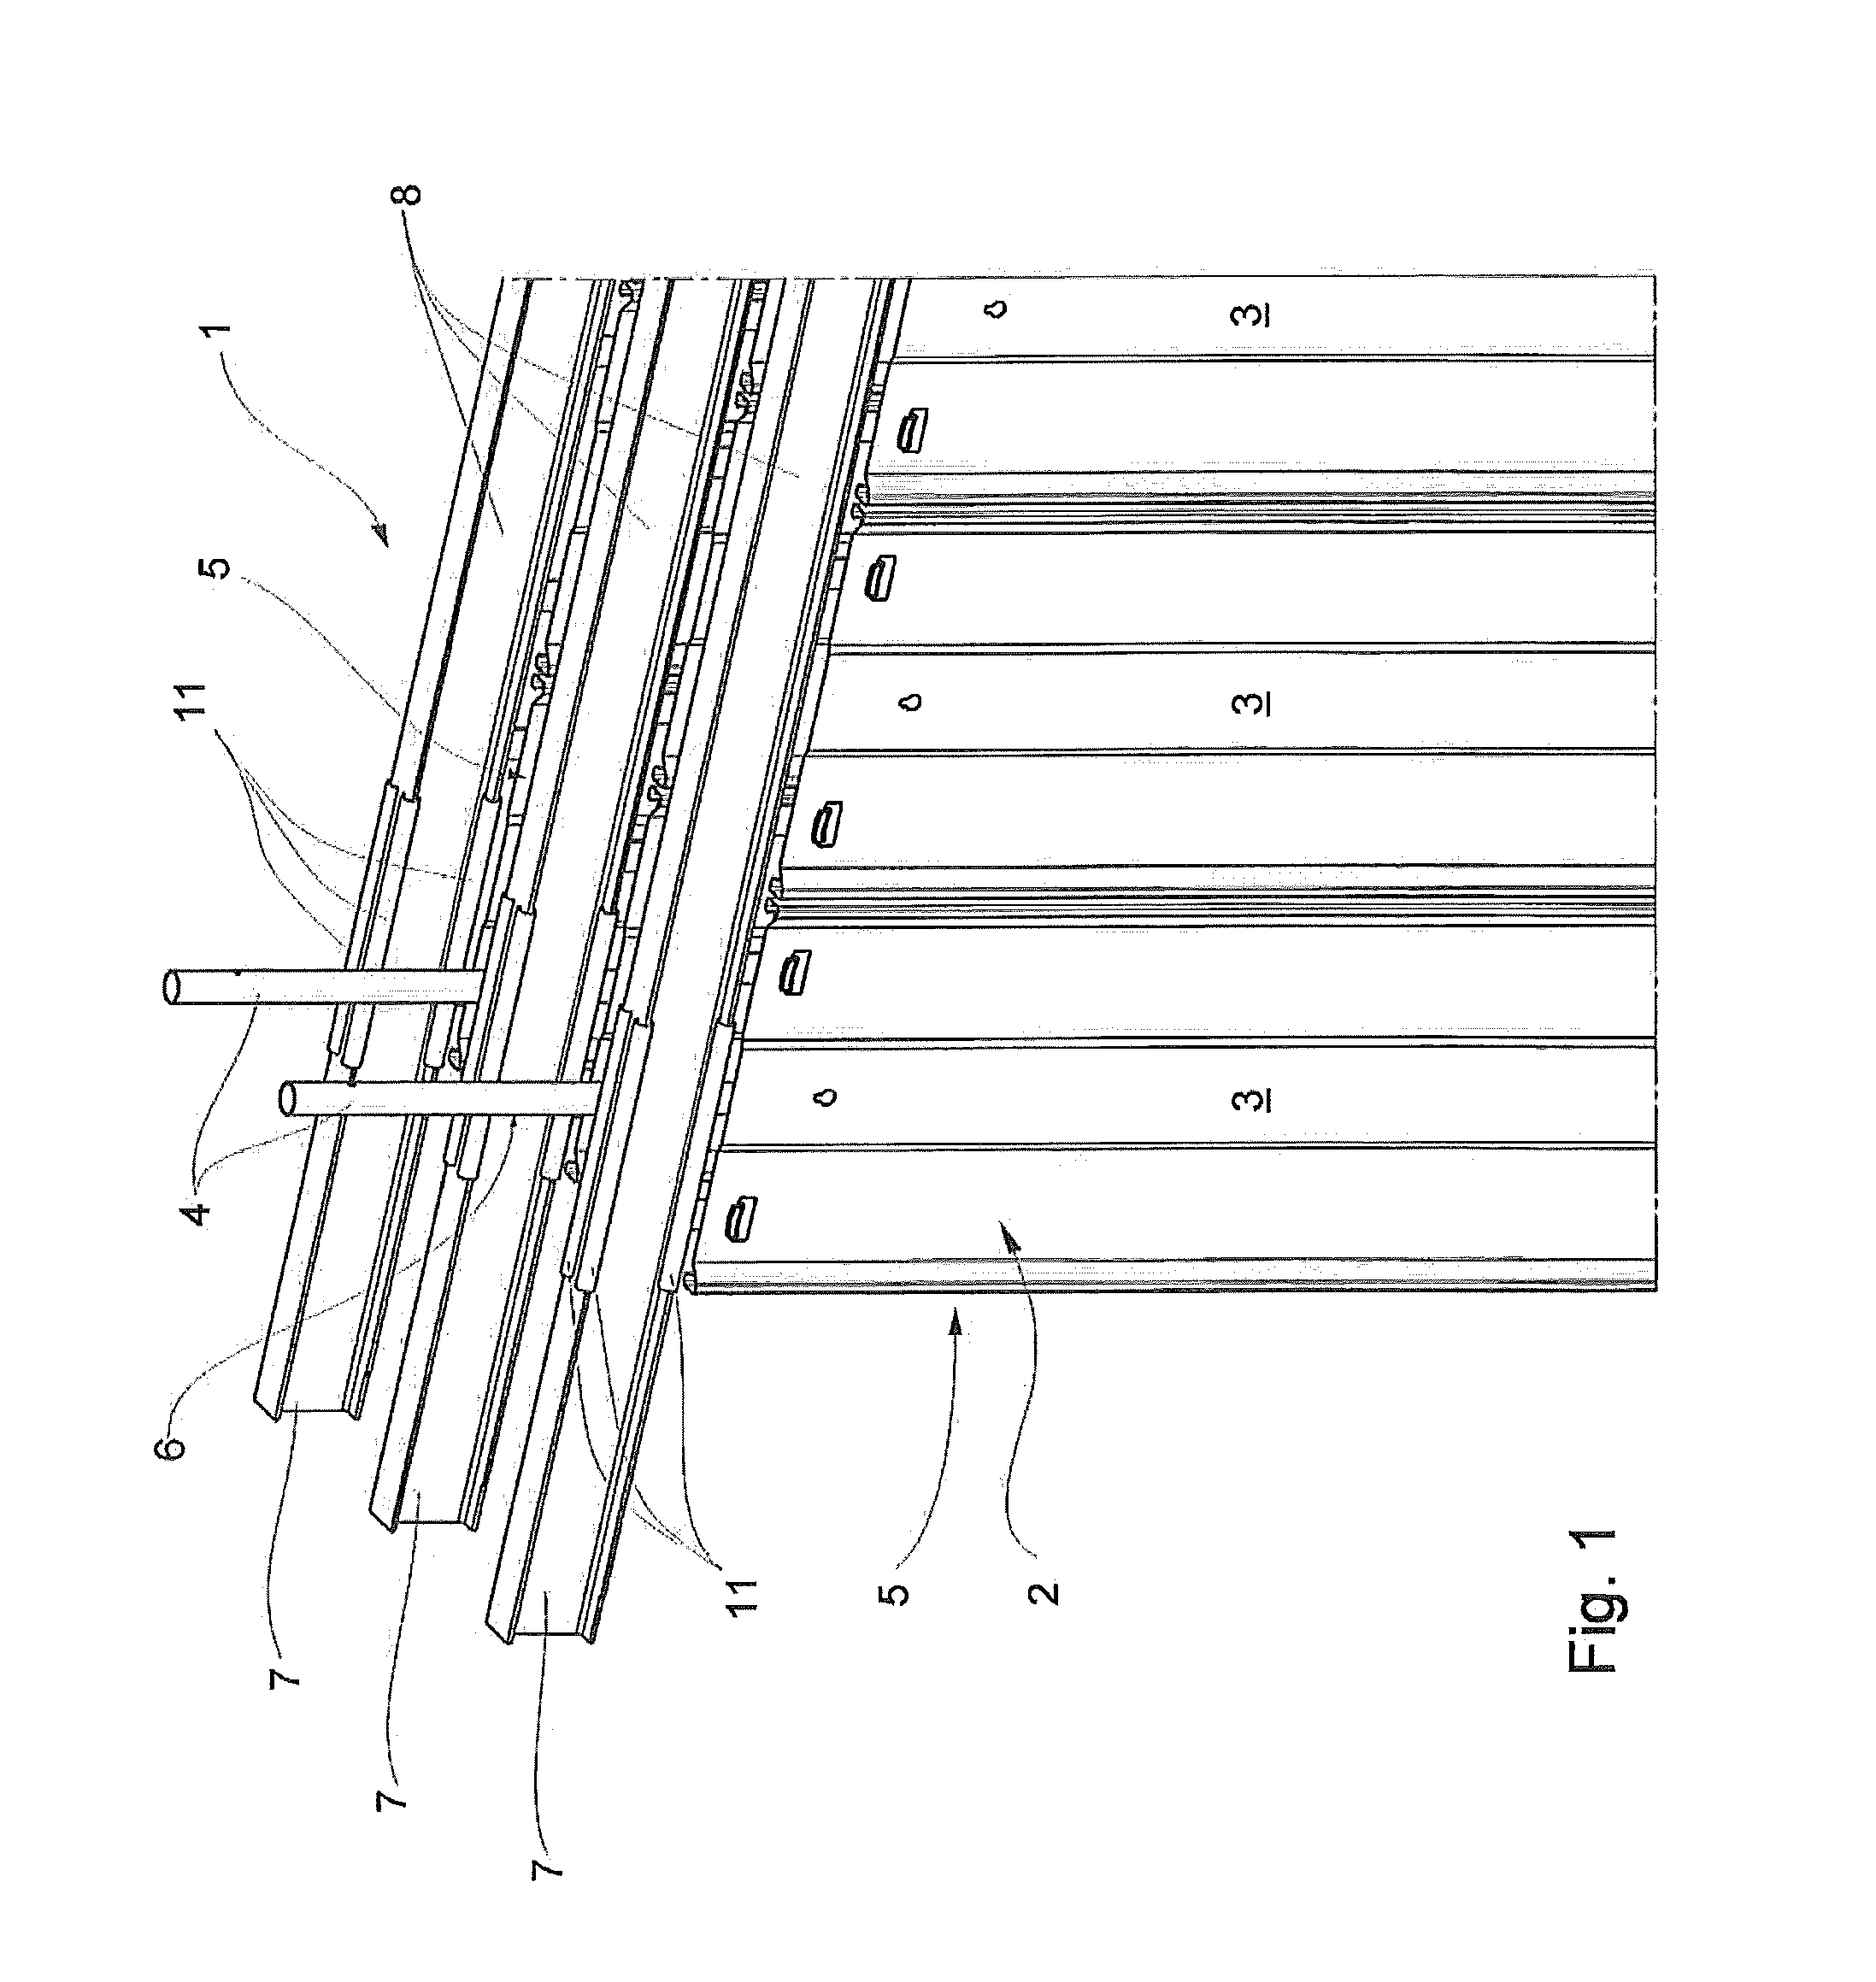 Electrical screening device for structures near high voltage parts of electrostatic precipitators